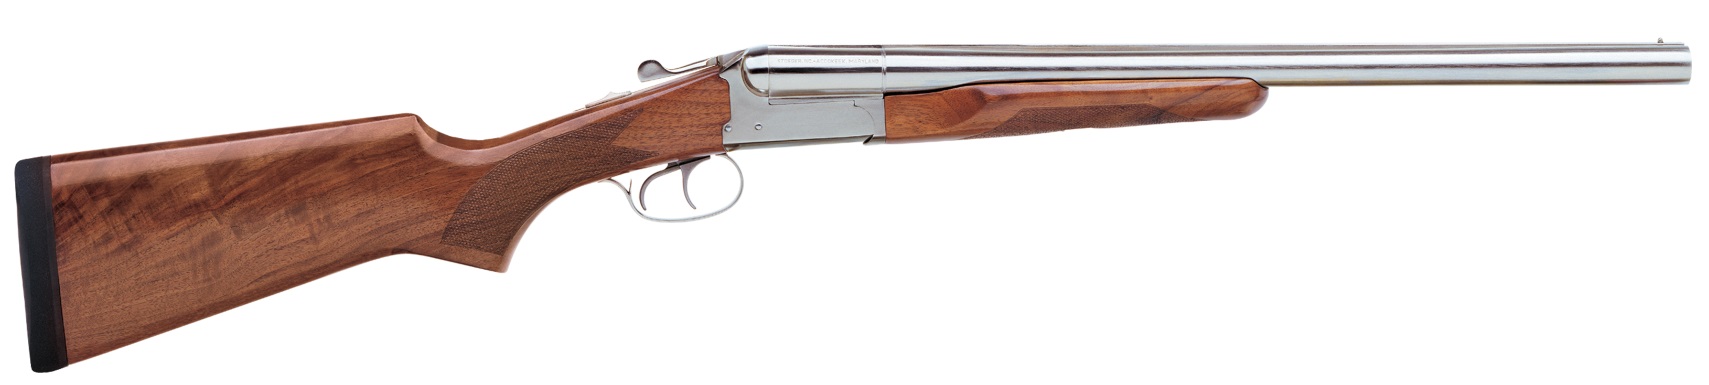 Review of the Stoeger Coach Gun Supreme 12 Gauge